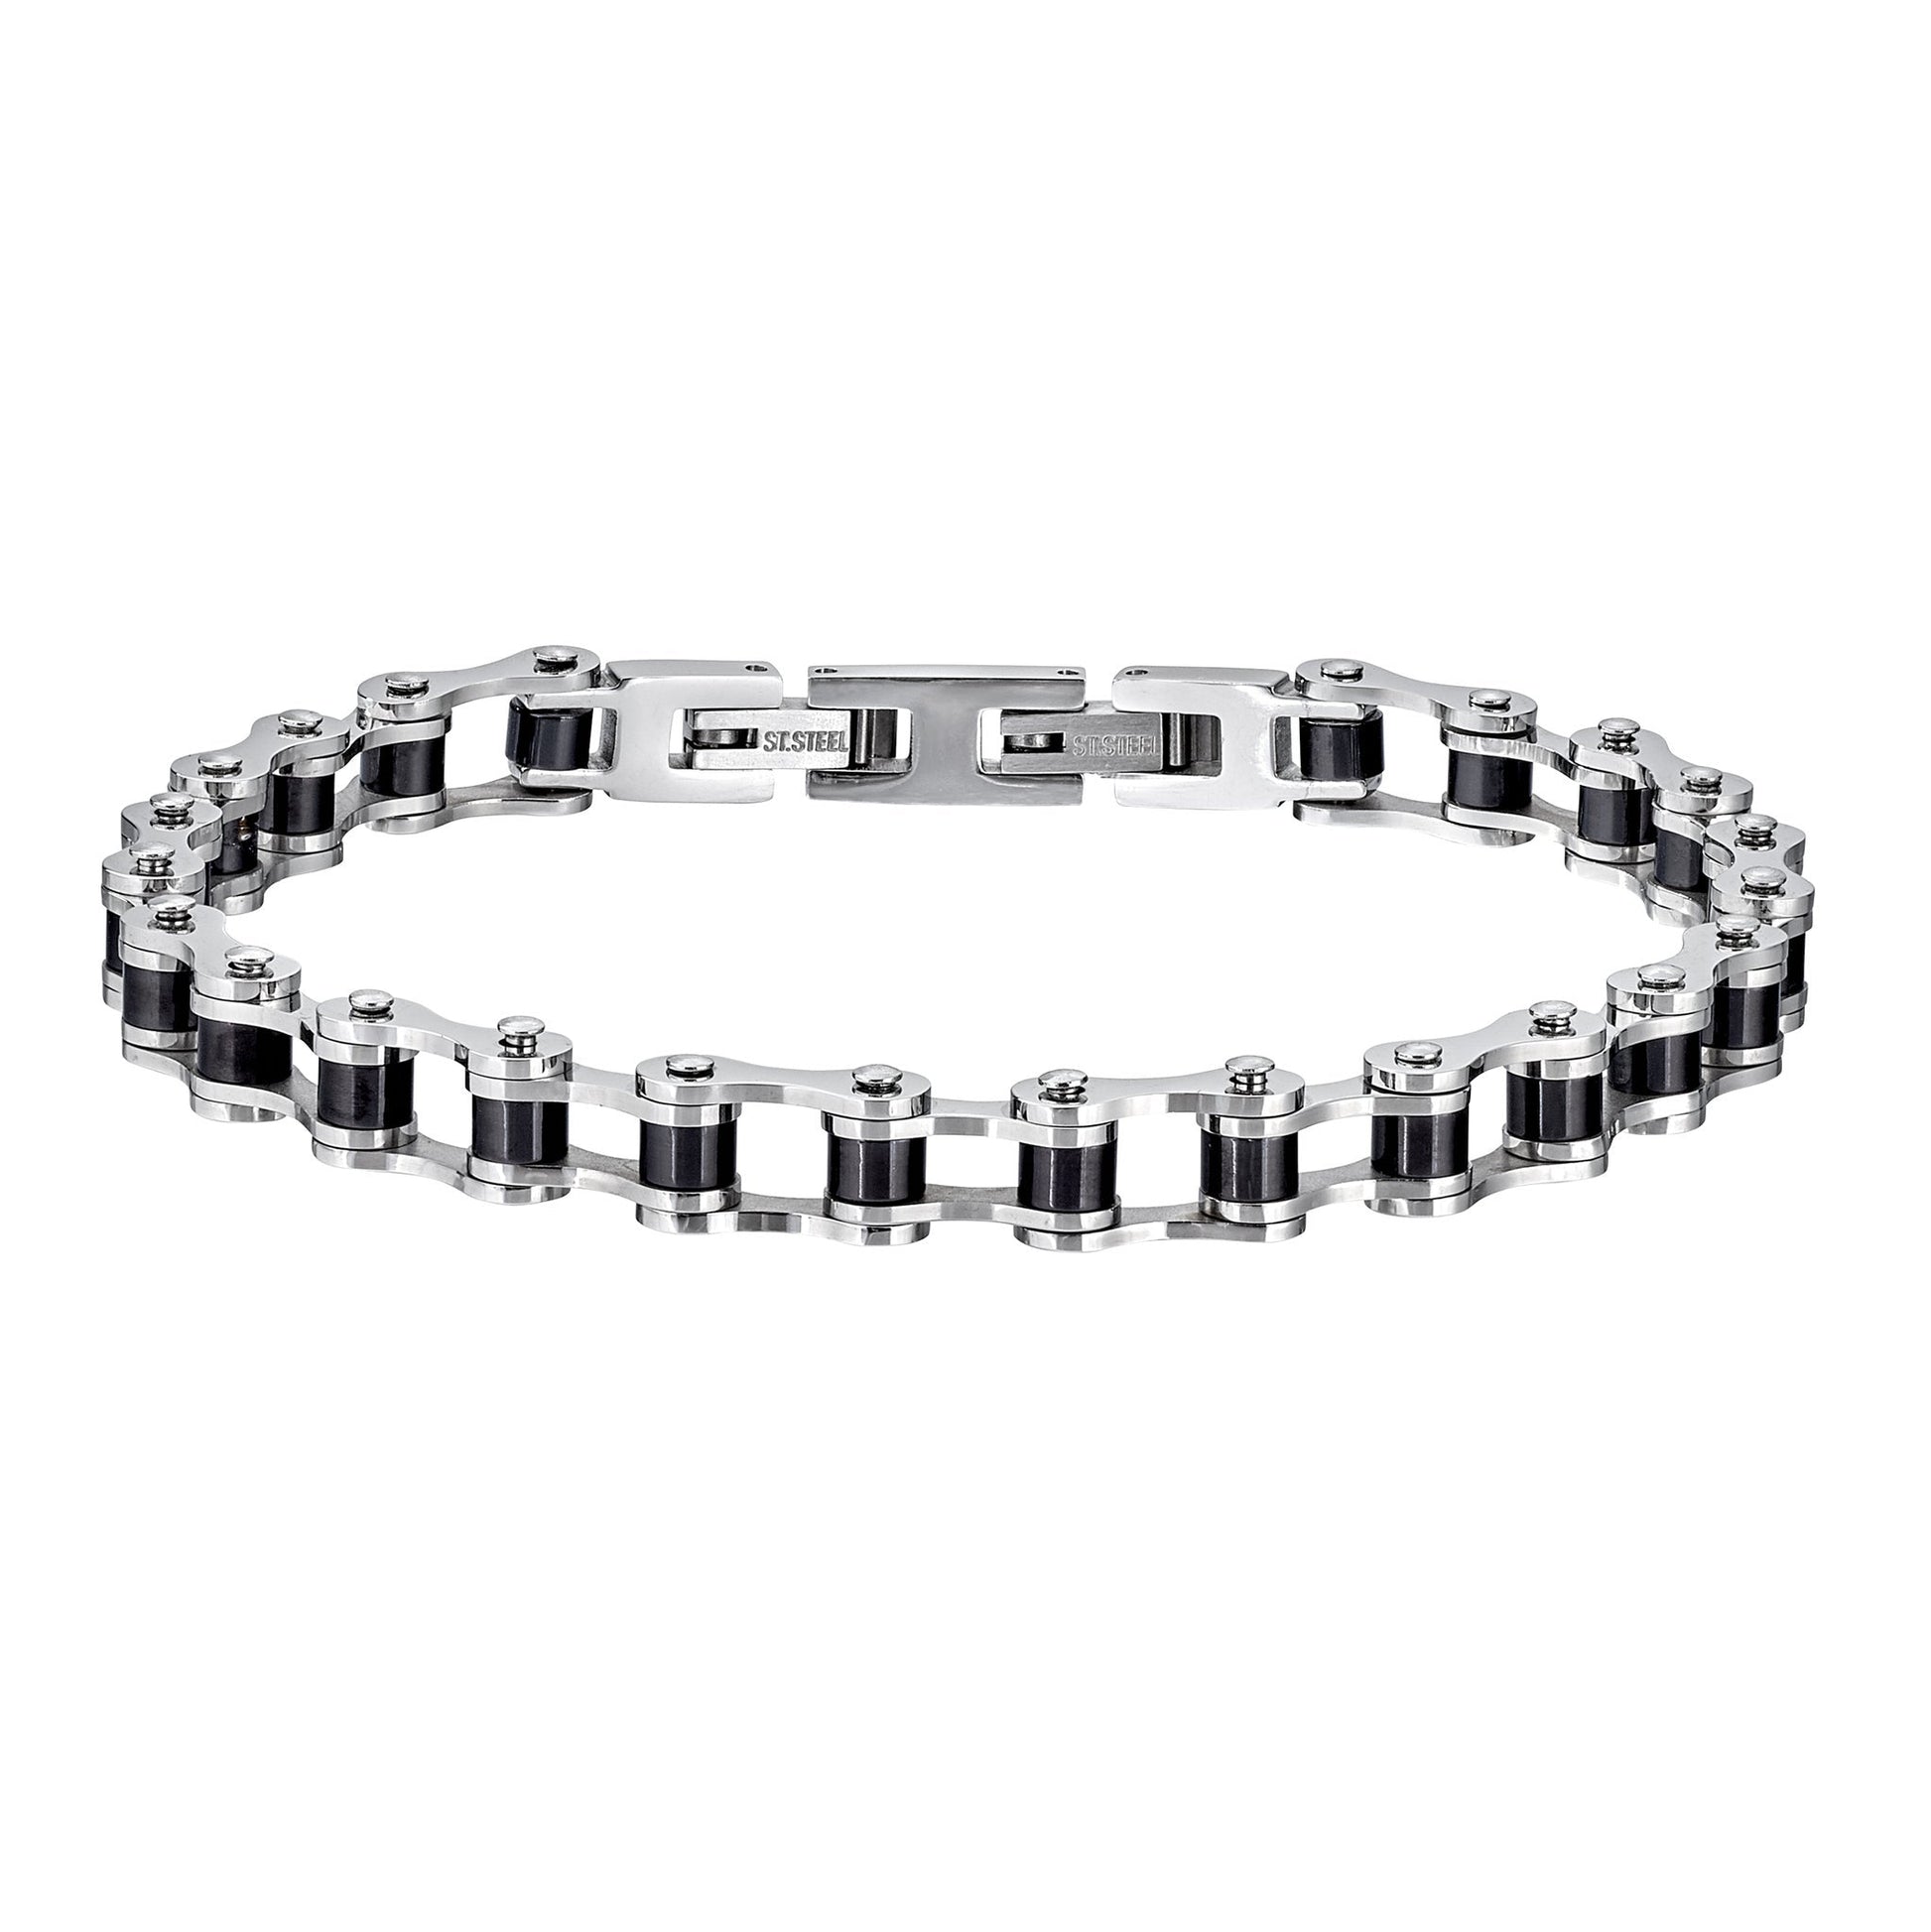 A black & silver stainless steel biker chain bracelet displayed on a neutral white background.